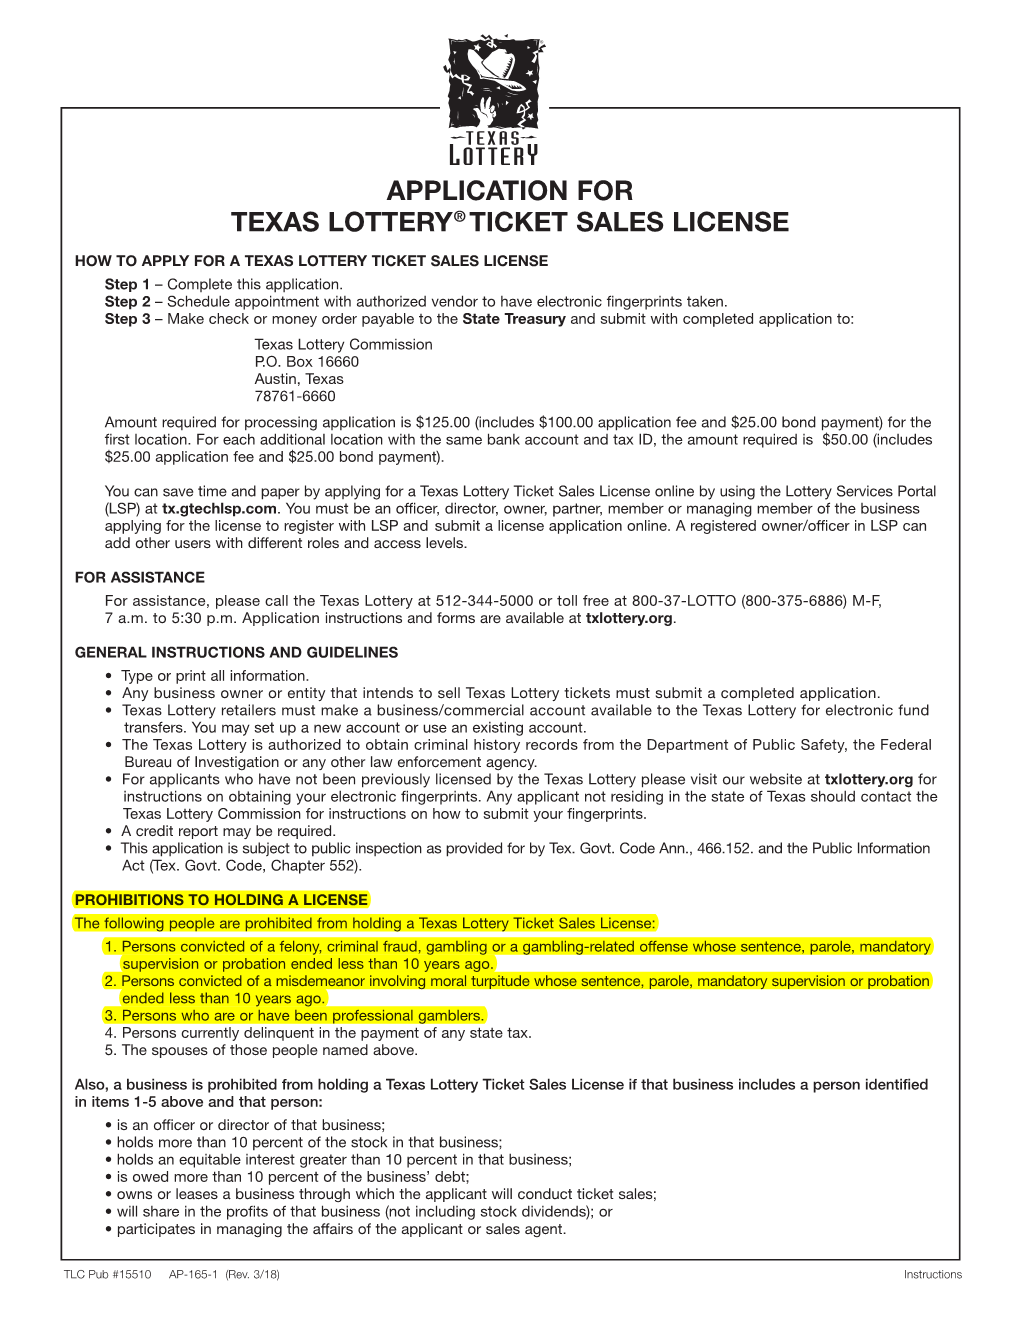 Application for Texas Lottery Ticket Sales License